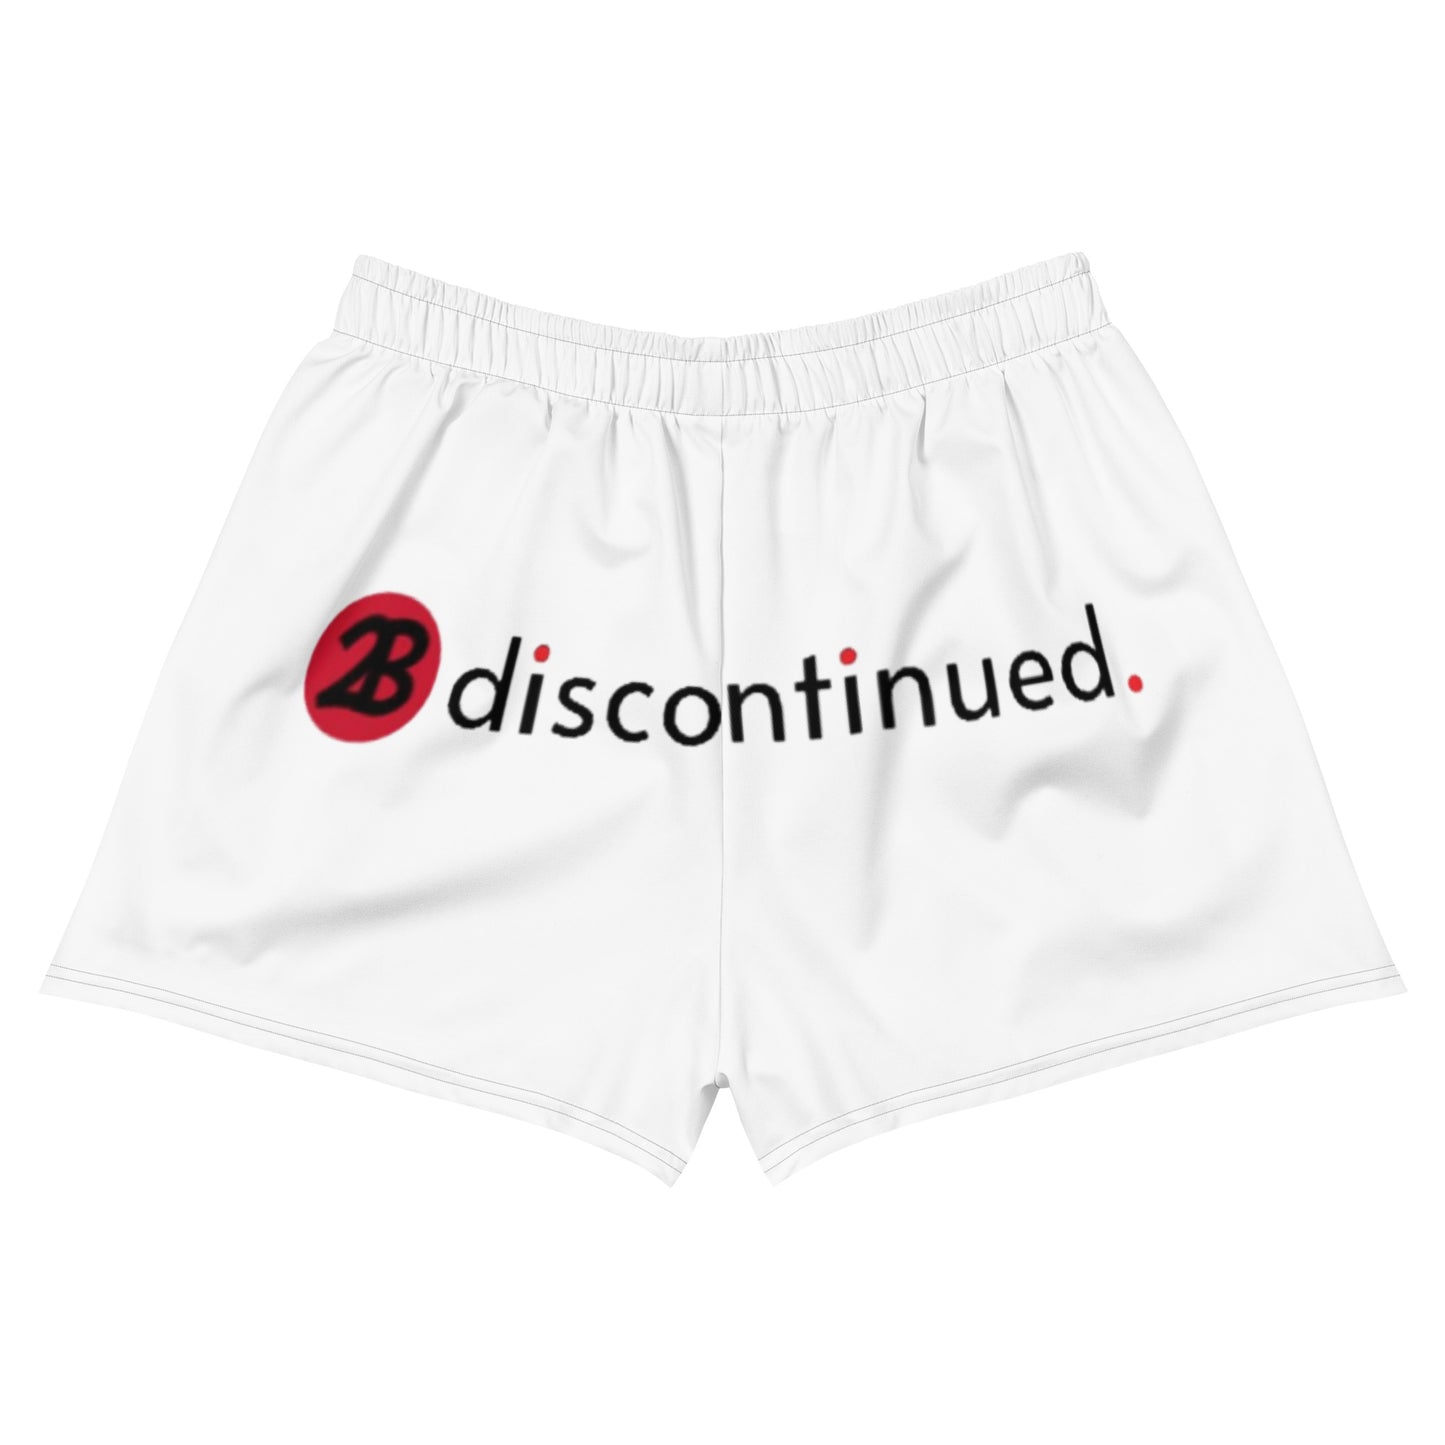 2Bdiscontinued. women’s athletic shorts wht